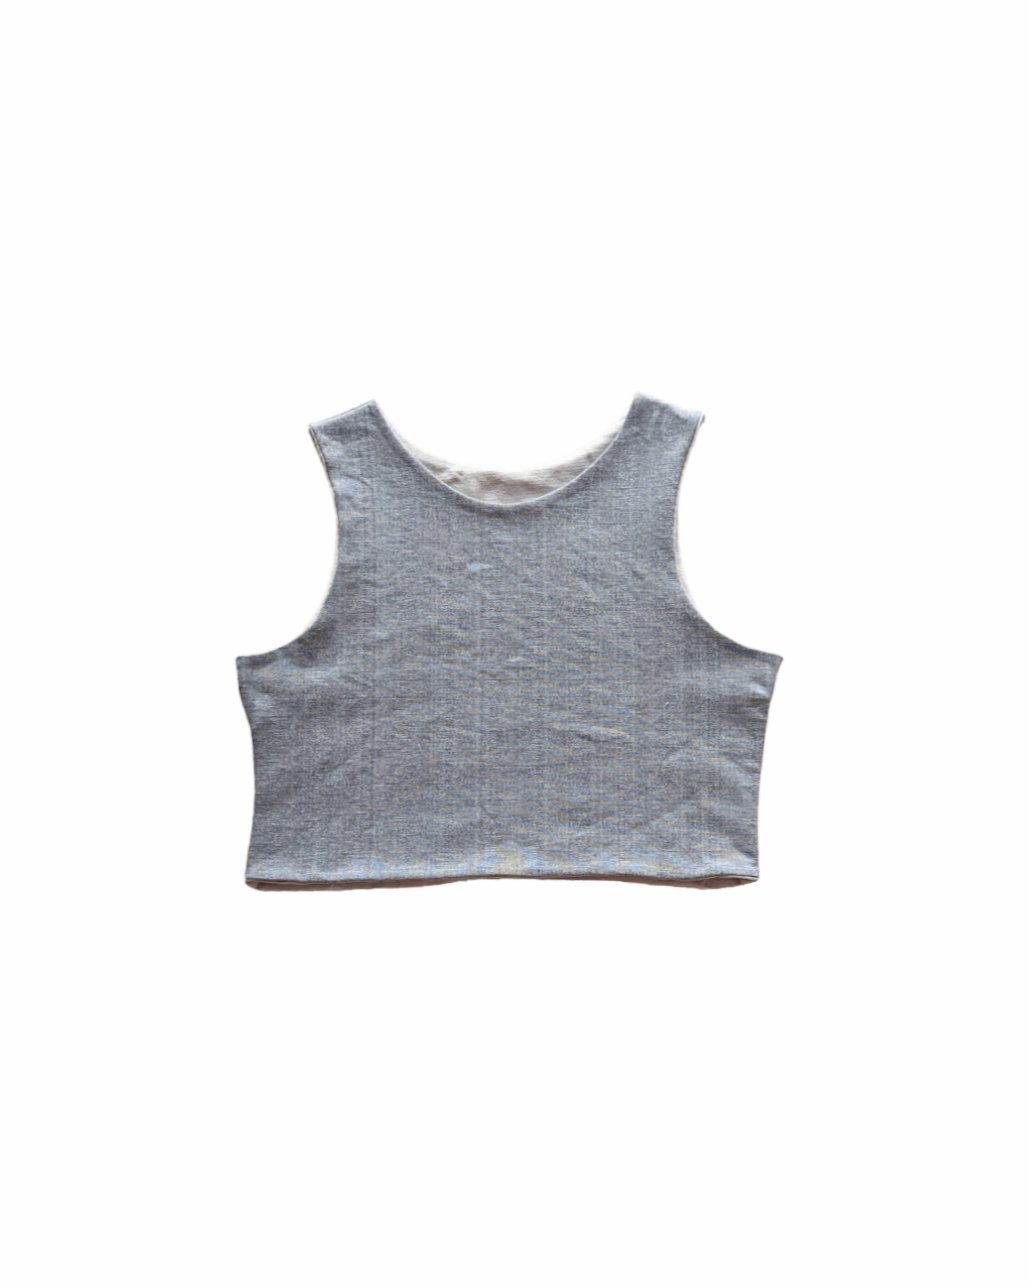 Image of CATCALL: THE REVERSIBLE CROP TOP in GREY